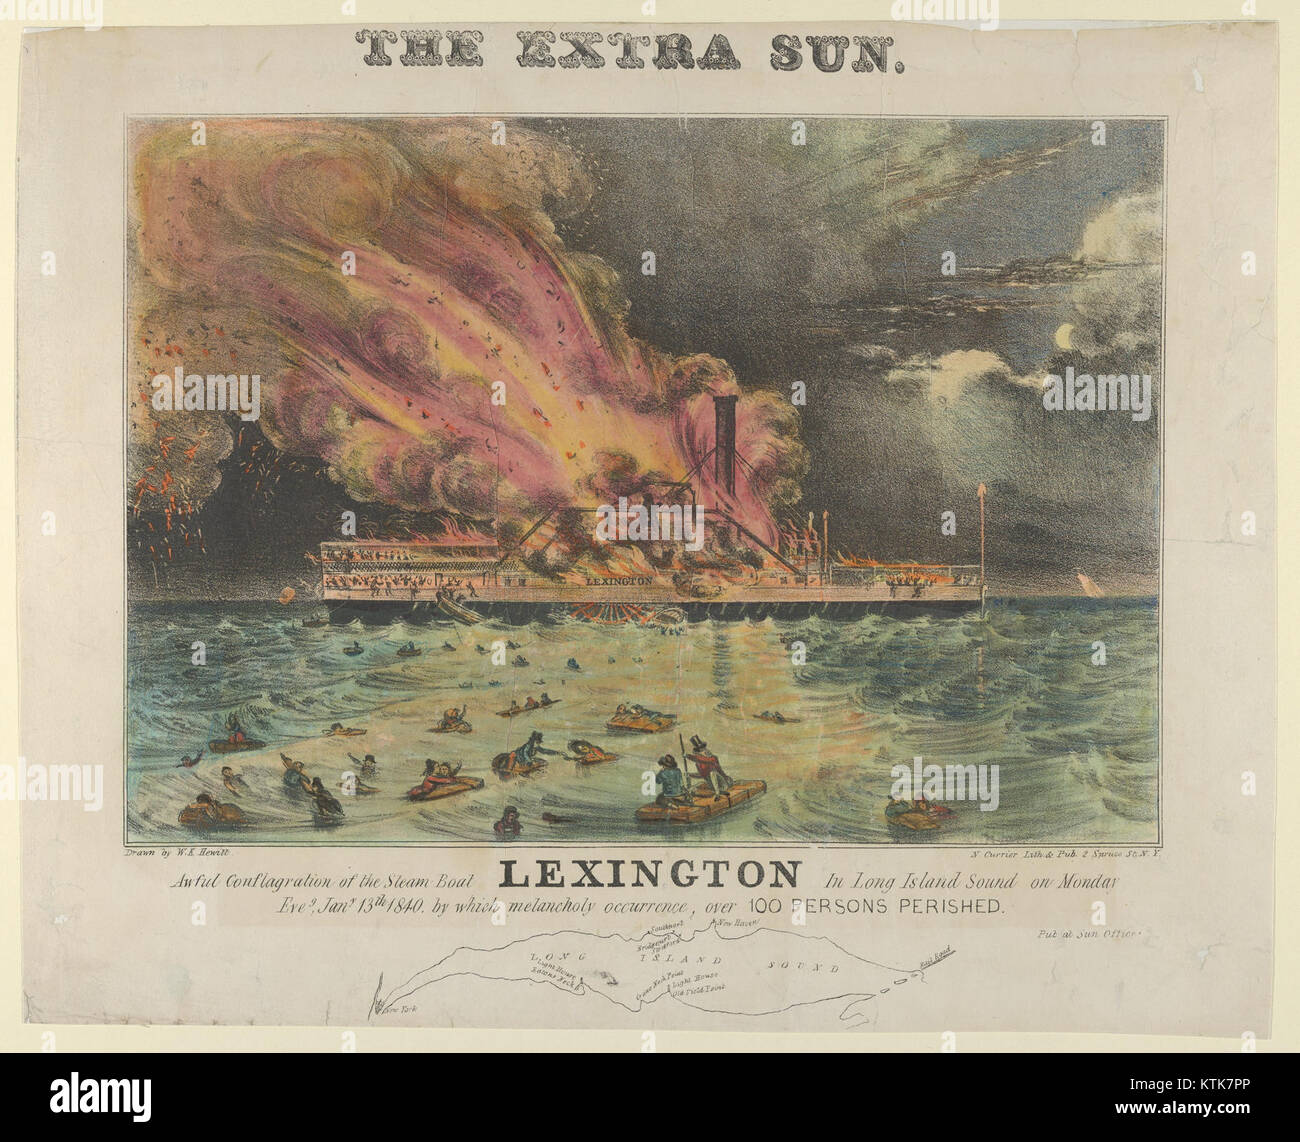 Awful Conflagration of the Steam Boat Lexington in Long Island Sound on Monday Eve, January 13th, 1840, by which melancholy occurrence, over 100 Persons Perished MET DP853624 Stock Photo